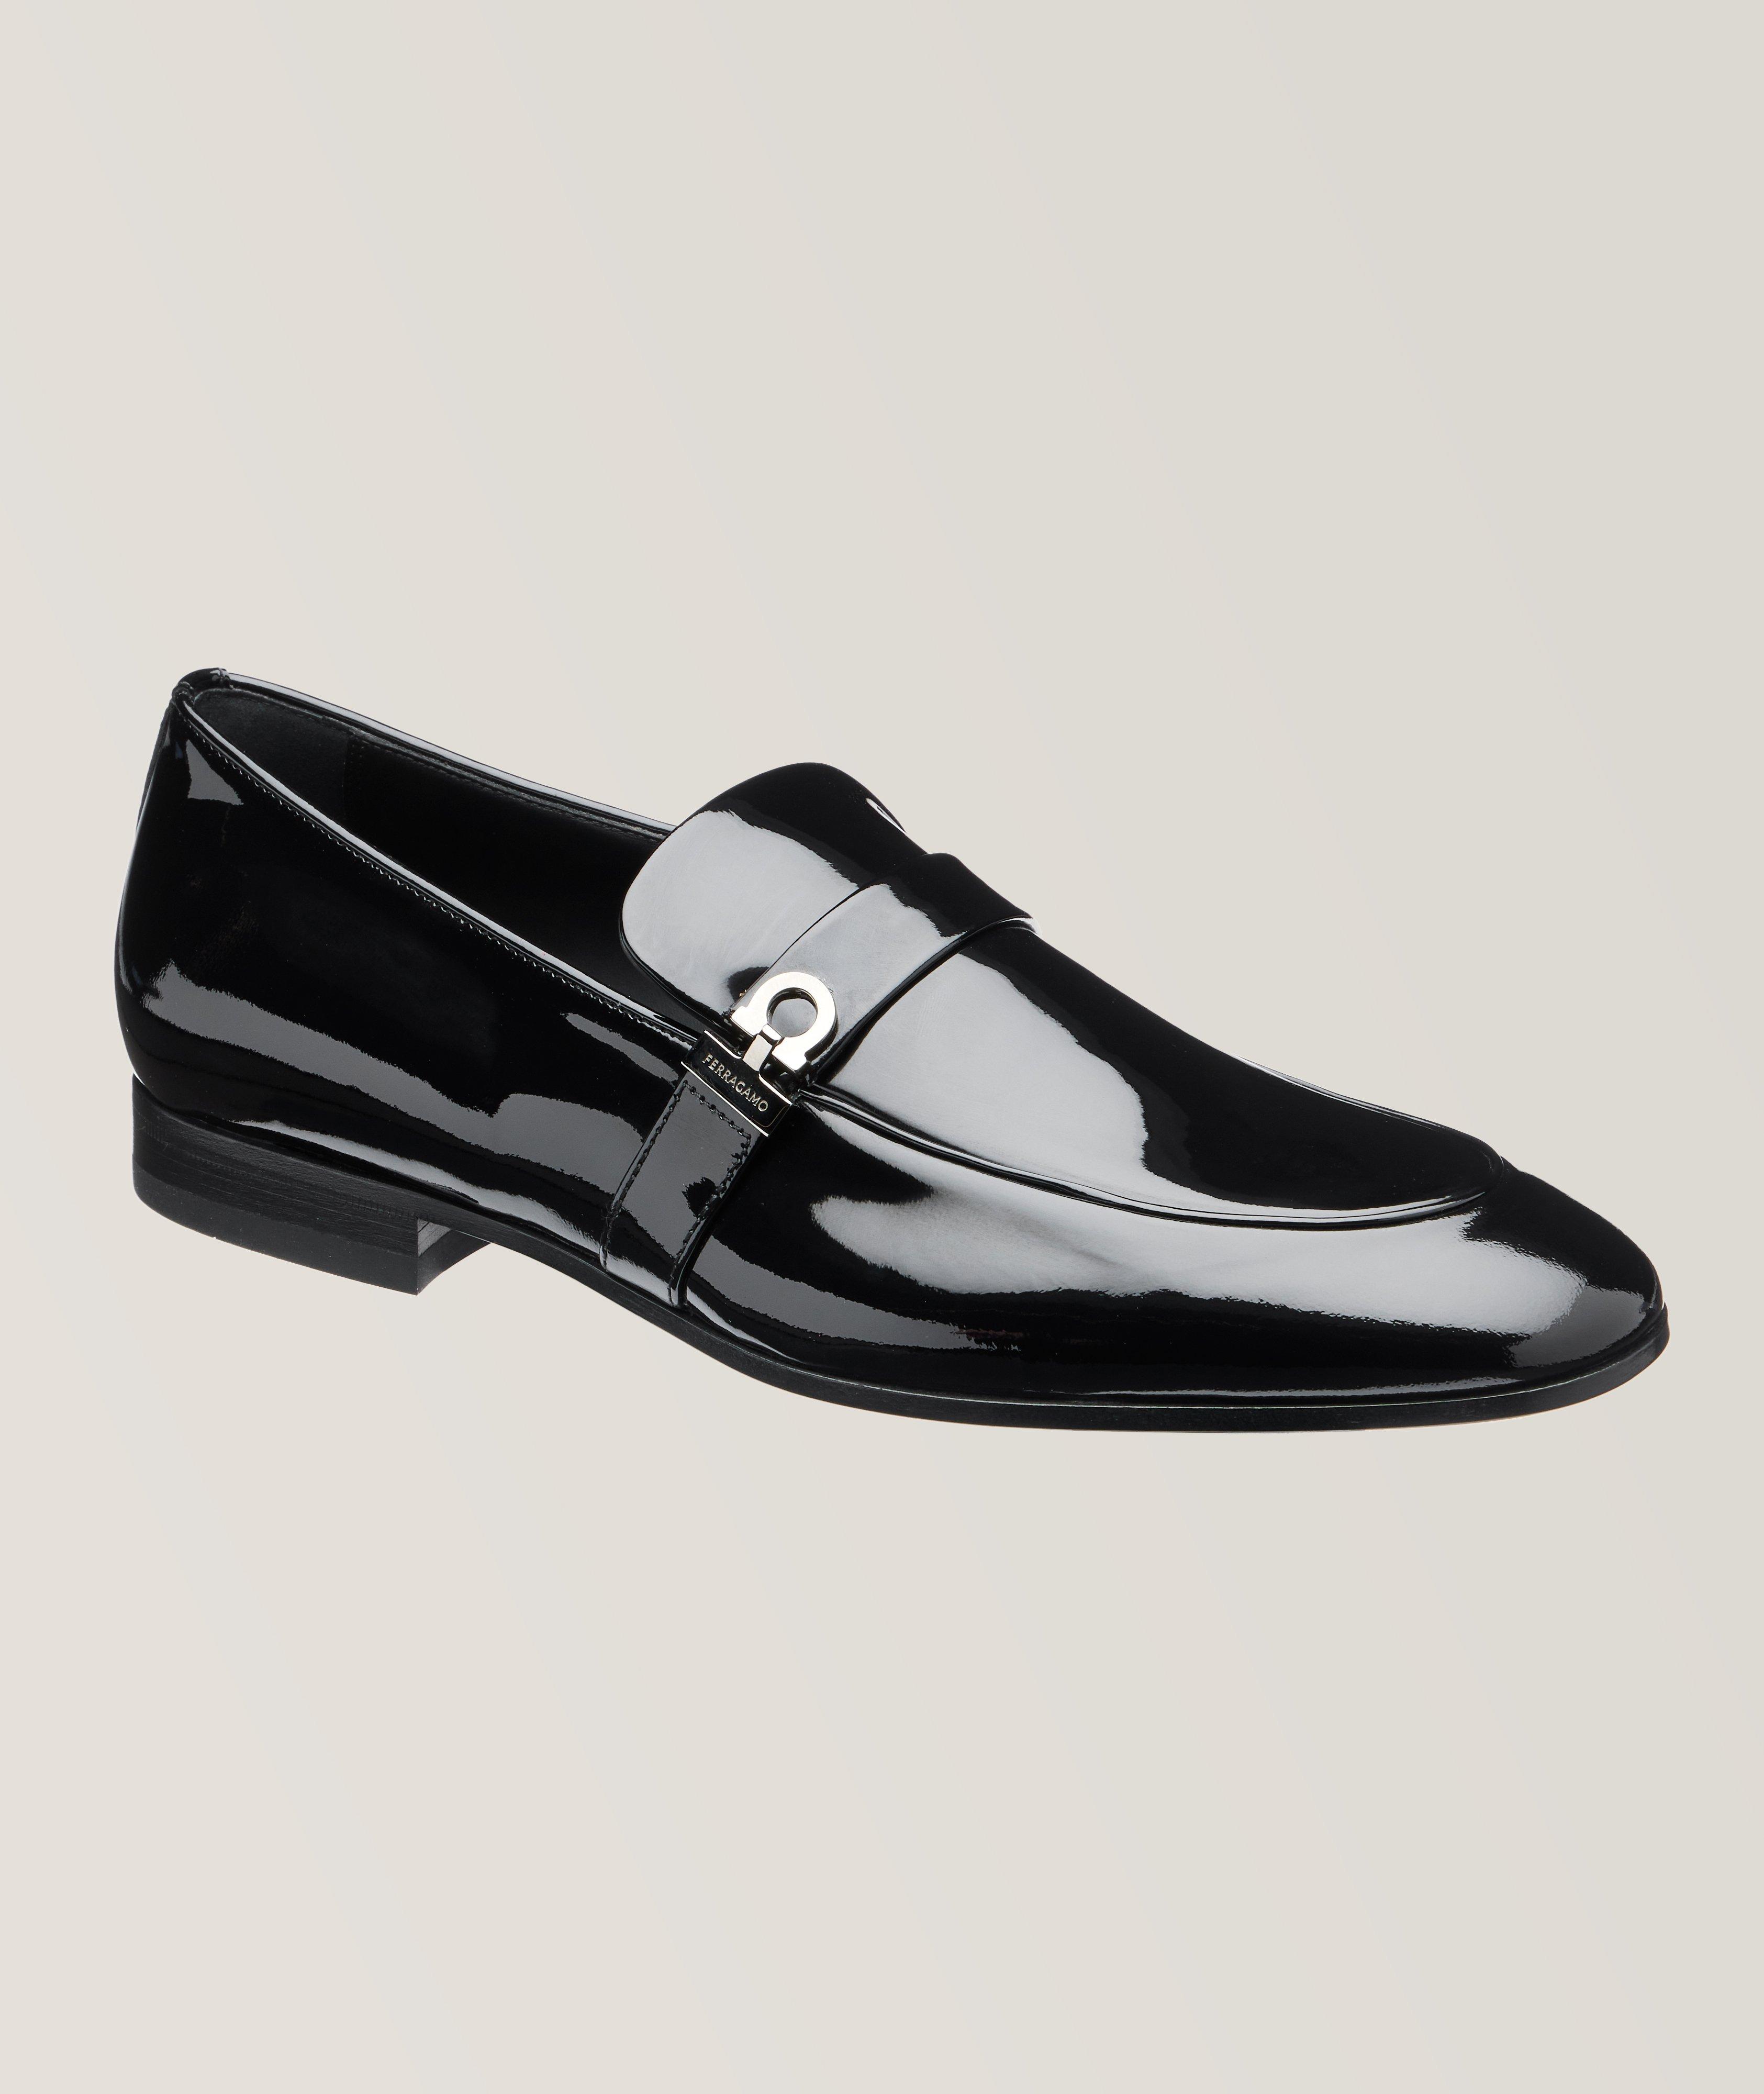 Deal Gancio Bit Ornament Patent Leather Loafers